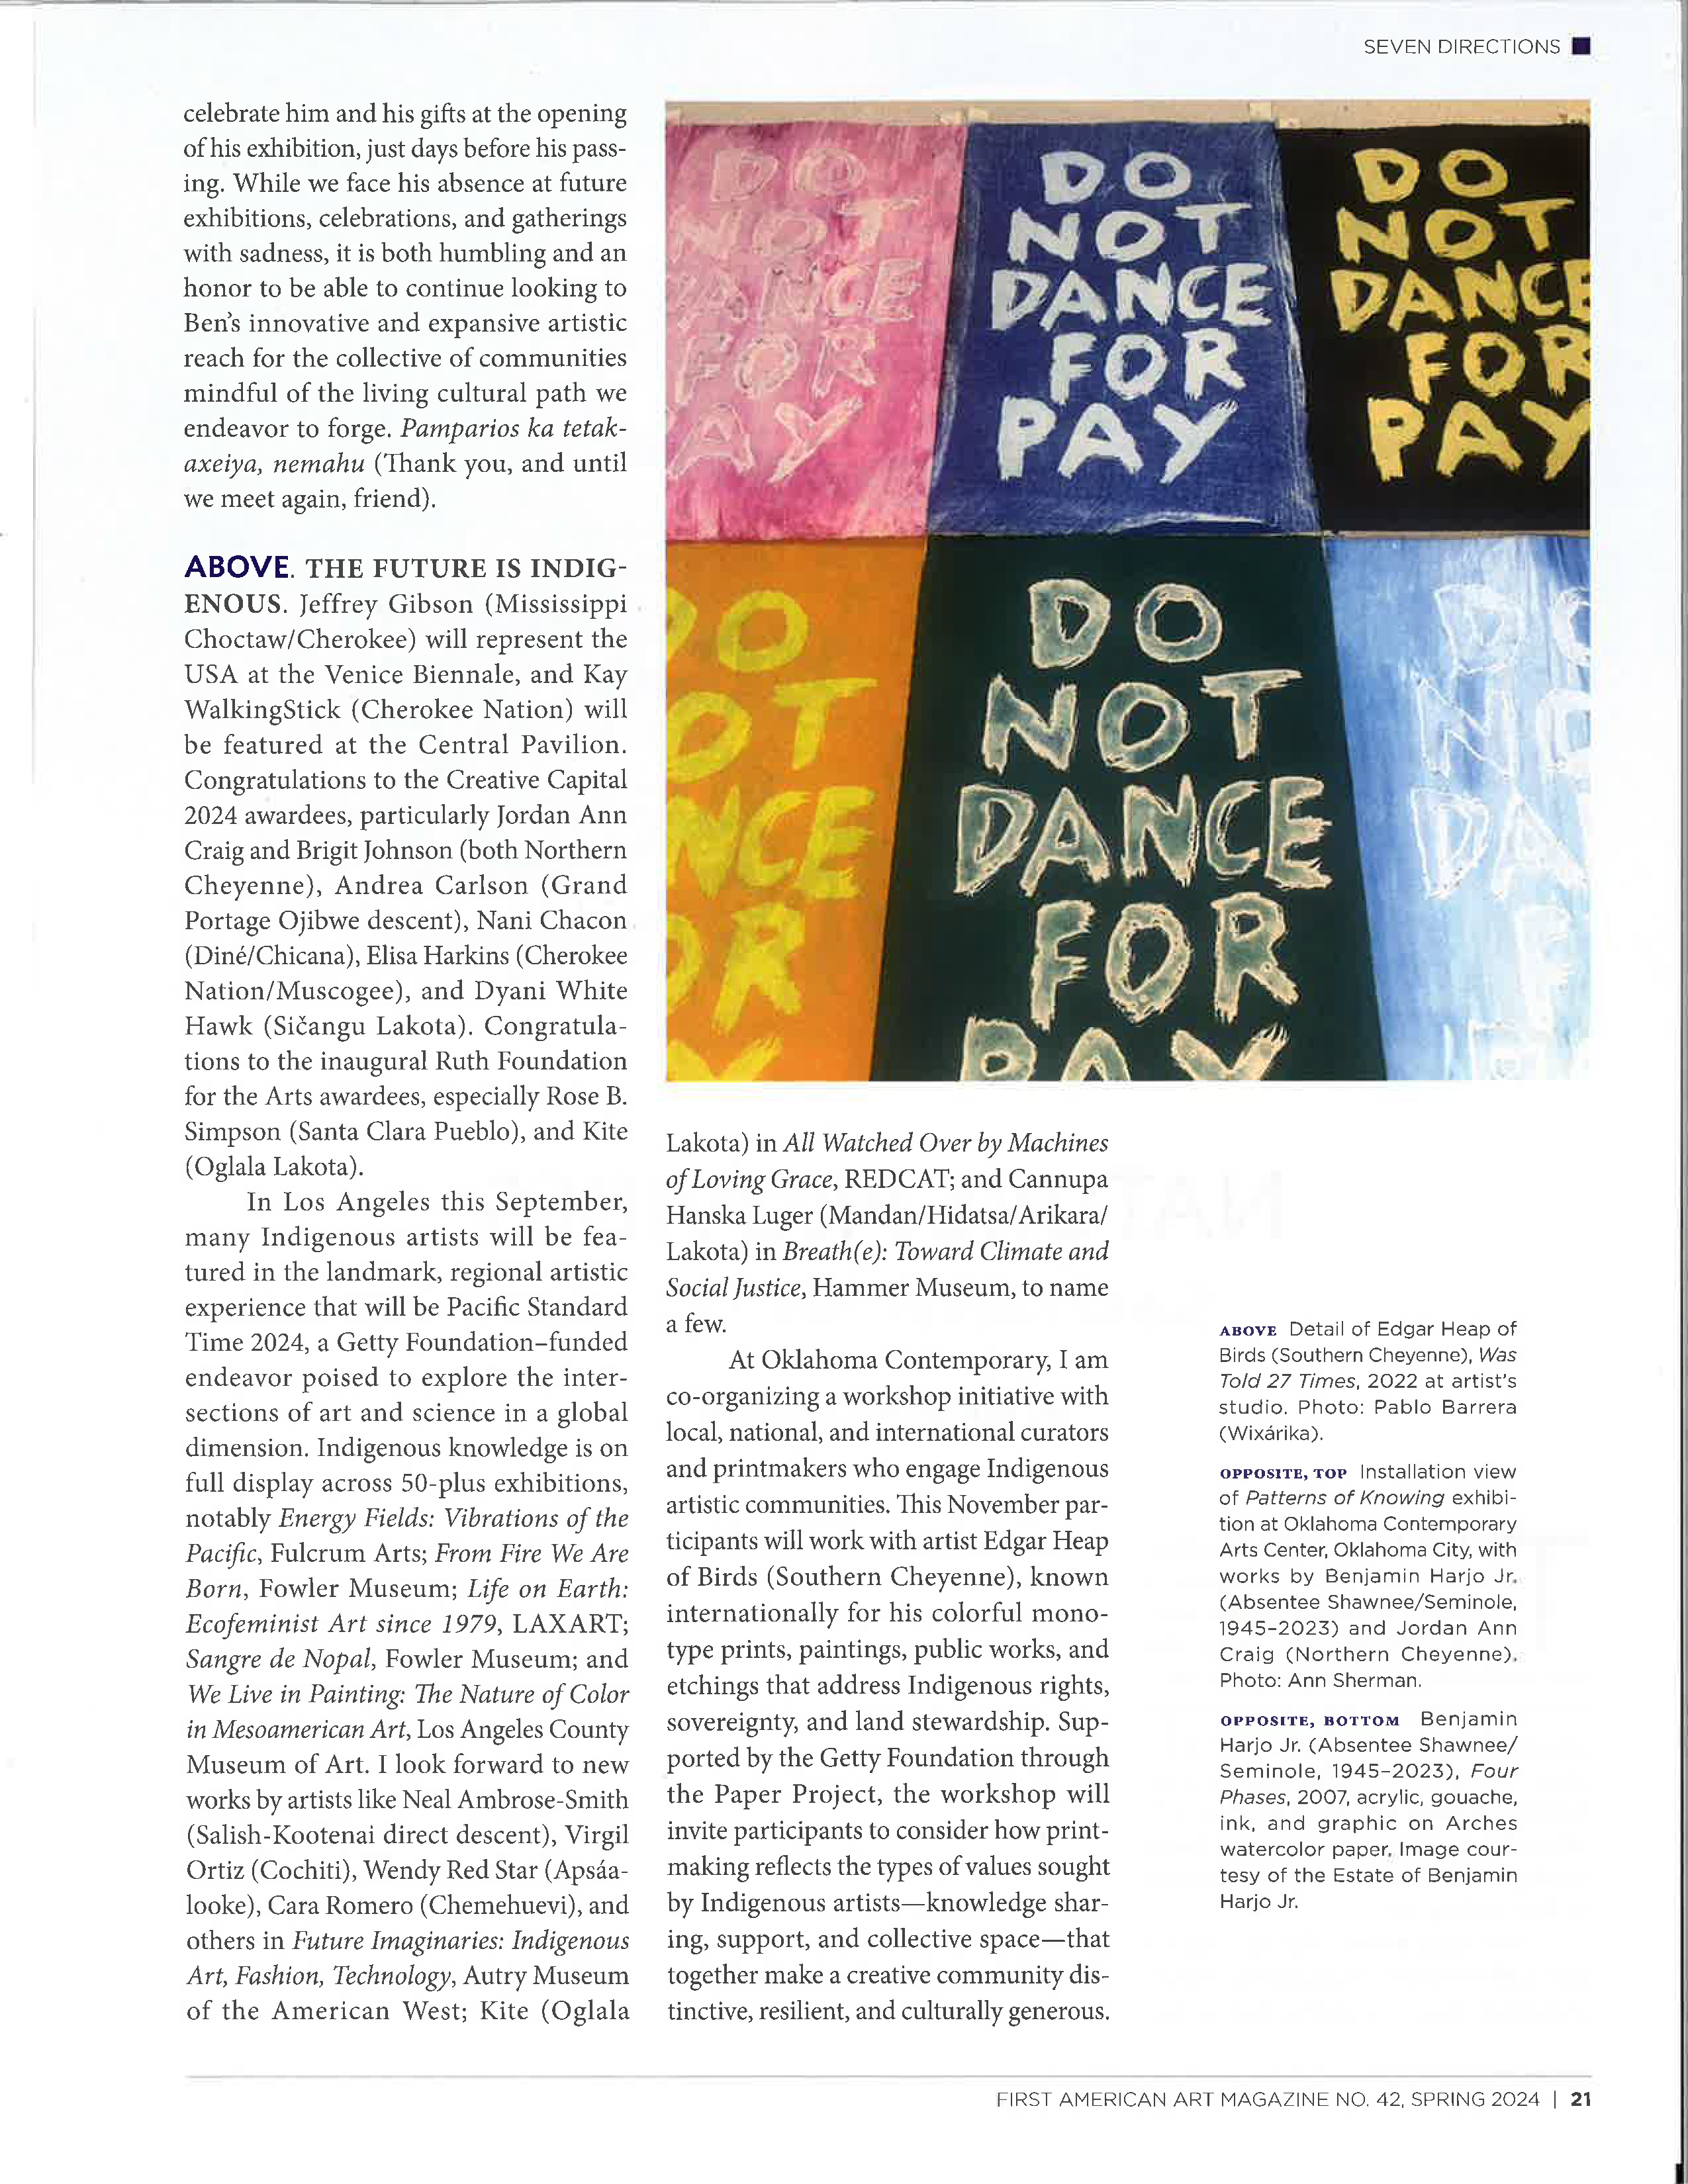 A magazine article with a photo of prints in various colors reading "DO NOT DANCE FOR PAY"